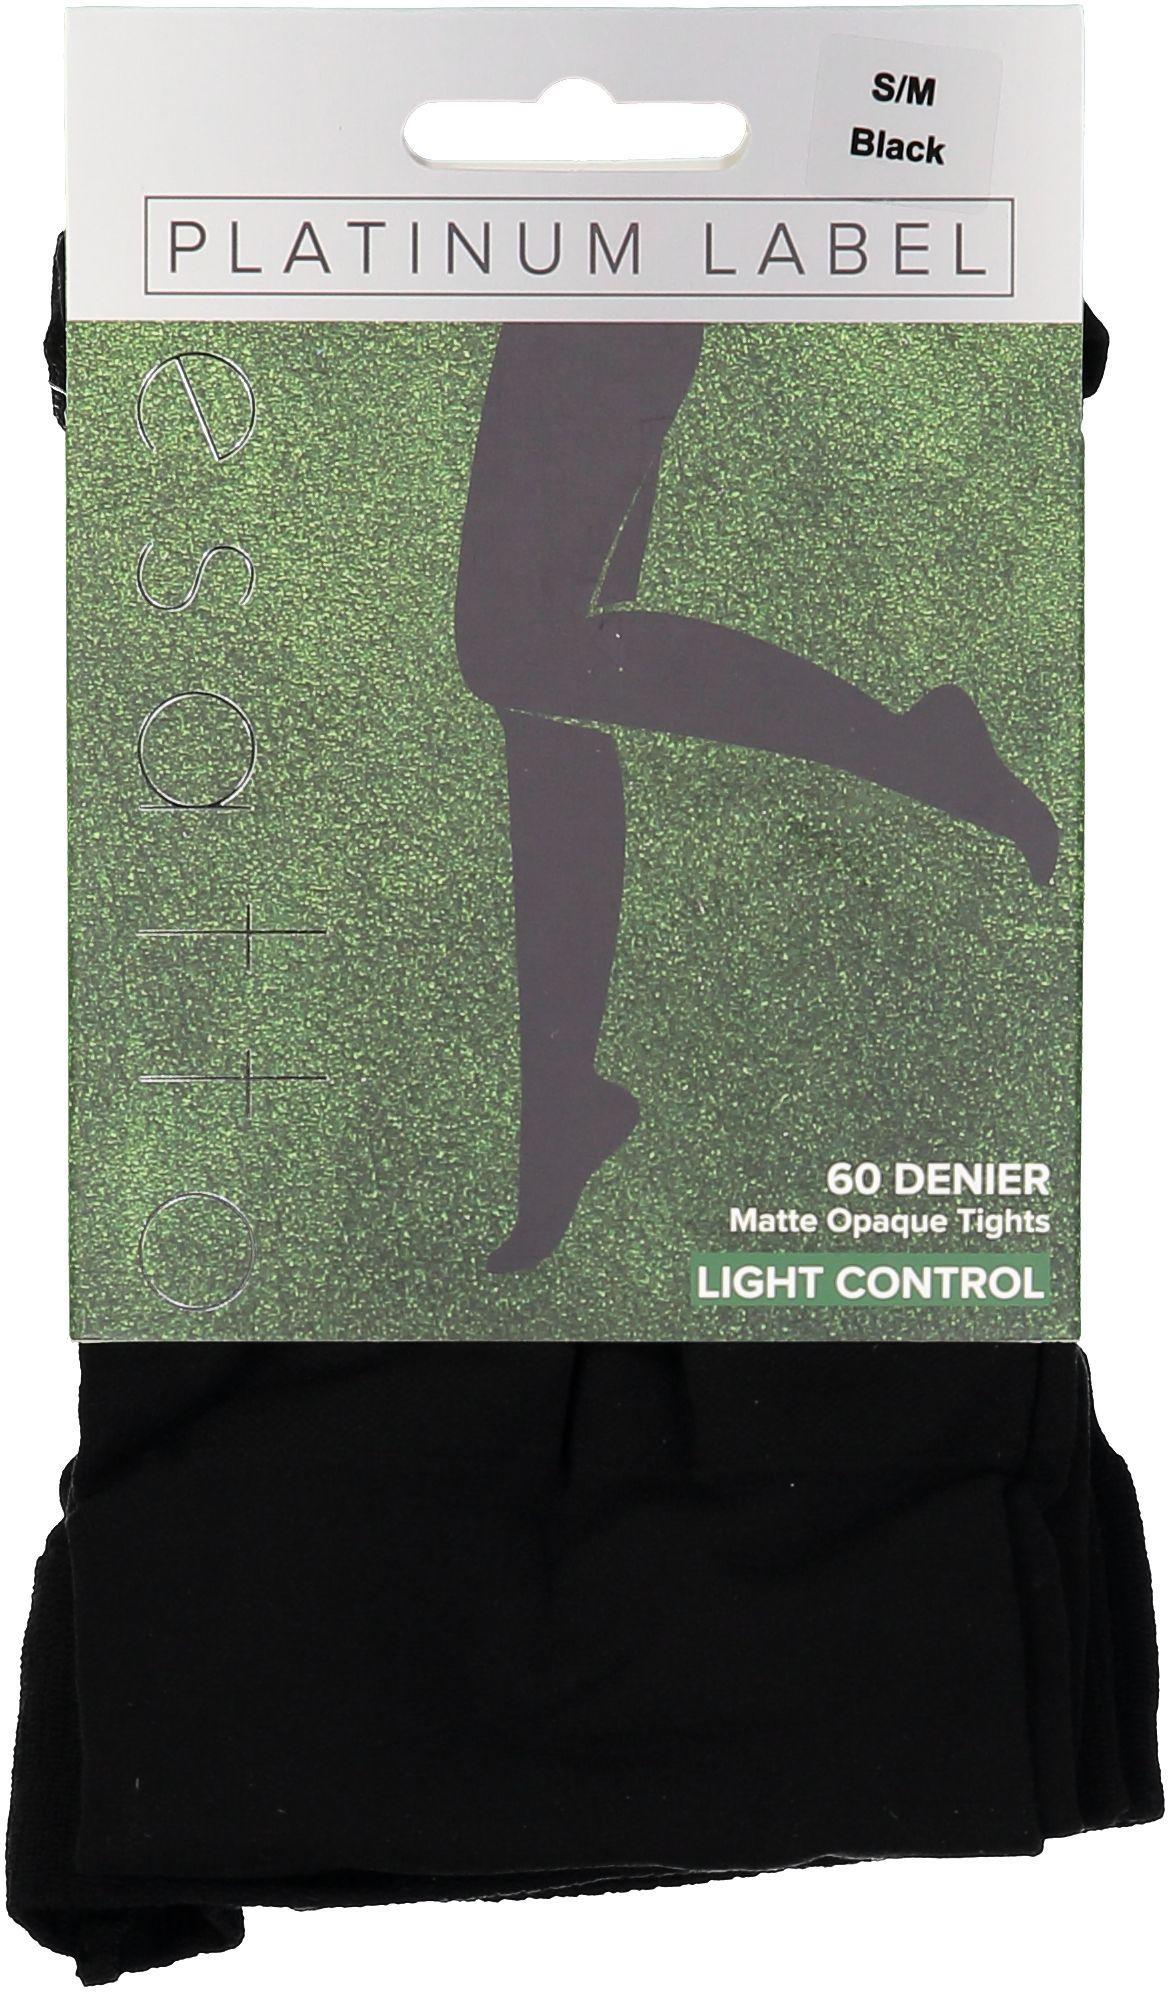 Buy Black 60 Denier Opaque Tights 3 Pack L, Tights